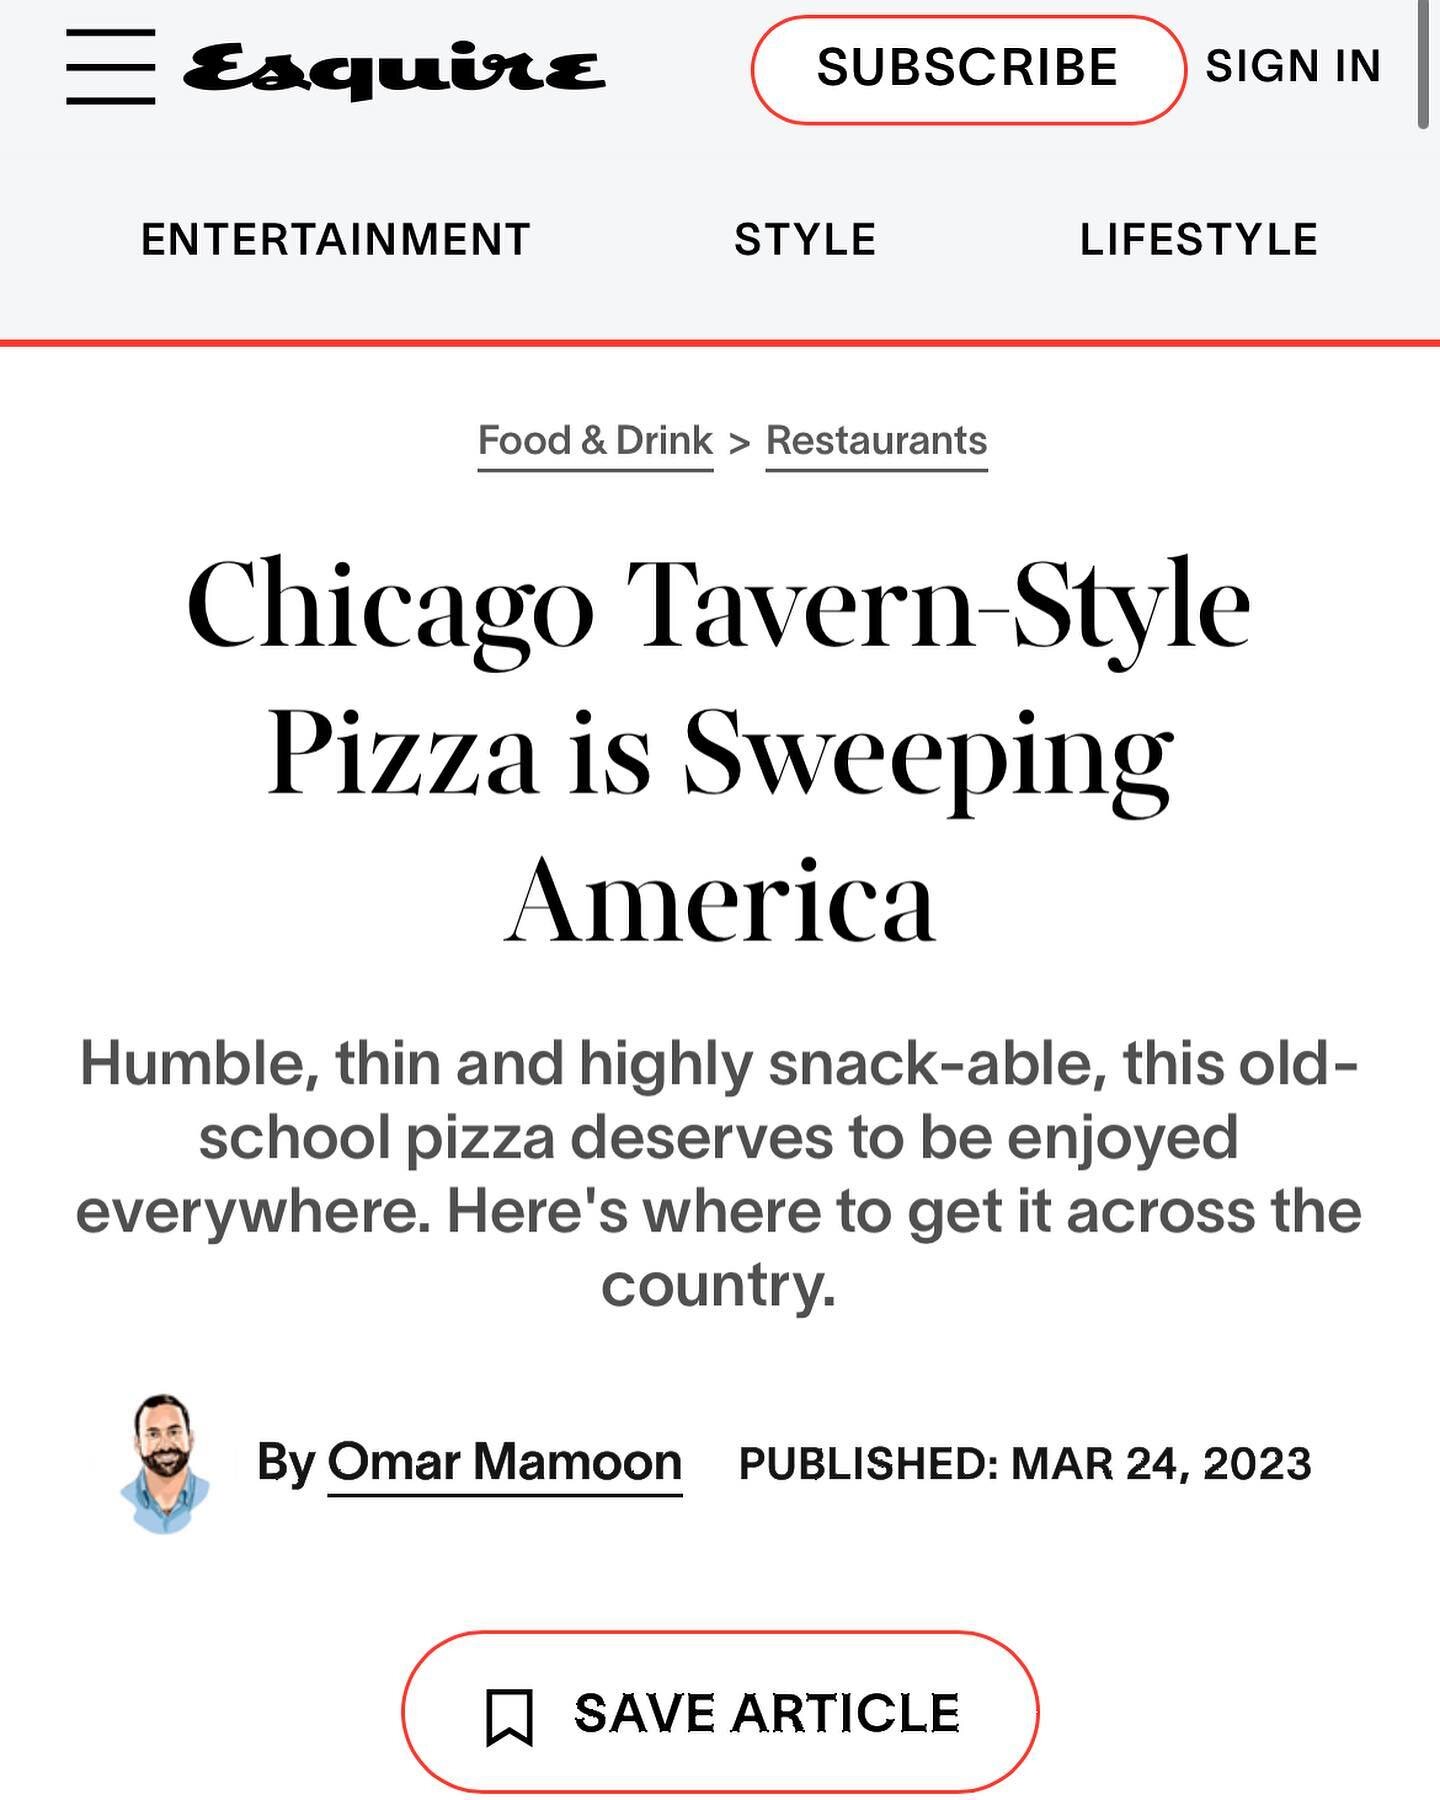 Thank you @ommmar for featuring our little pizza shop in your @esquire CTSP article!!! When @billyfederighi @bradleyshorten and I (@cecilymariefederighi) started making pizzas all those years ago, never in our wildest dreams did we think we&rsquo;d b